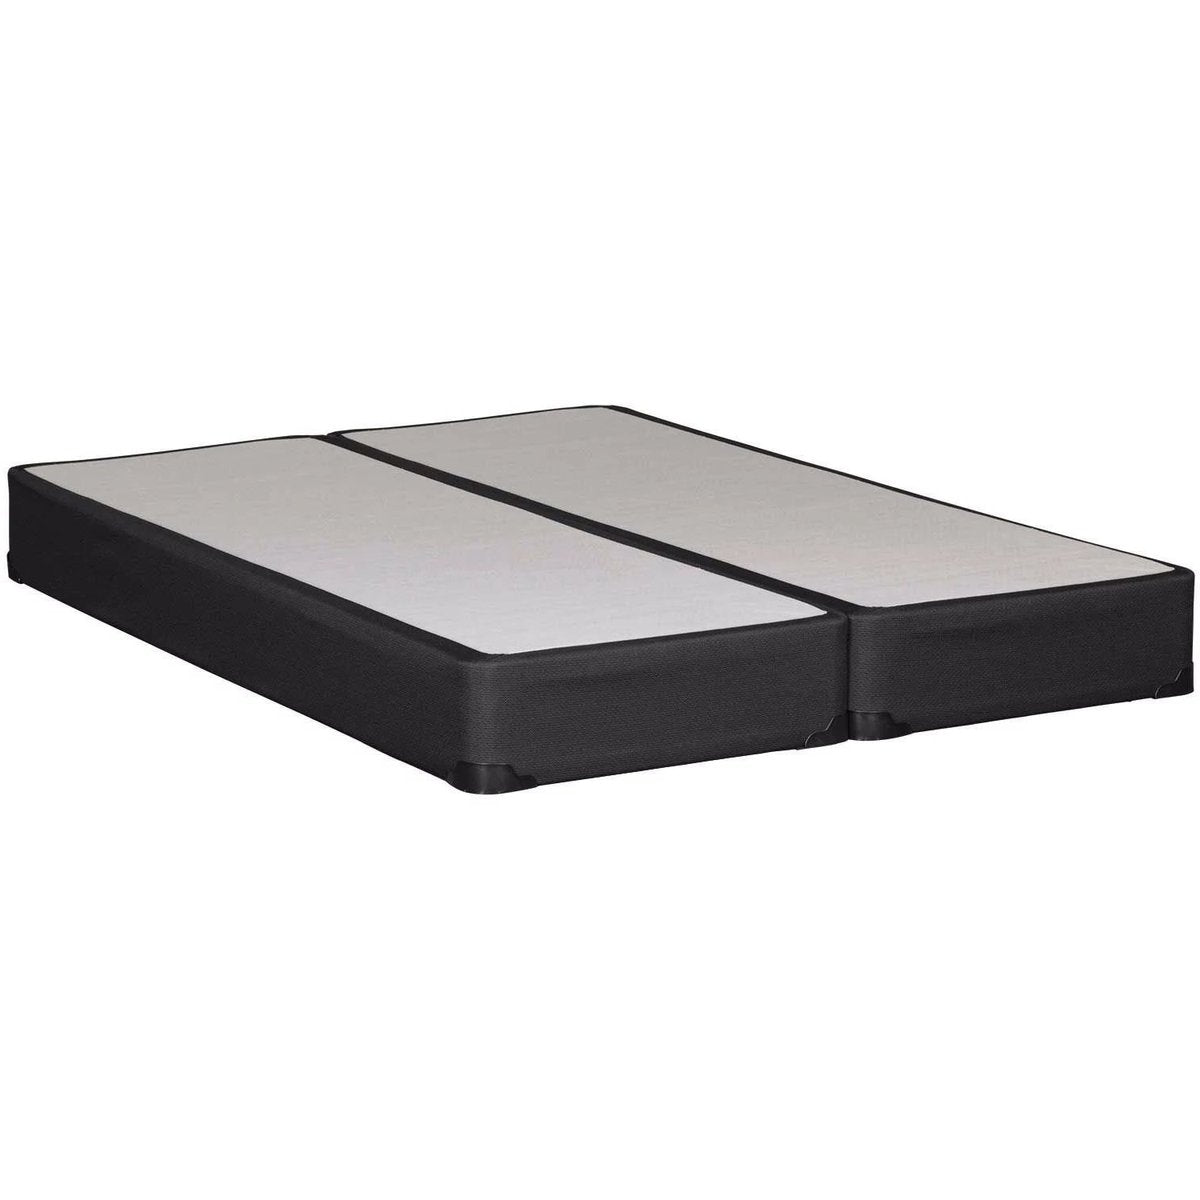 QUEEN SPLIT (QUEEN IN 2 PCS.) SIZE- (7" THICK- BLACK)- BOX SPRING